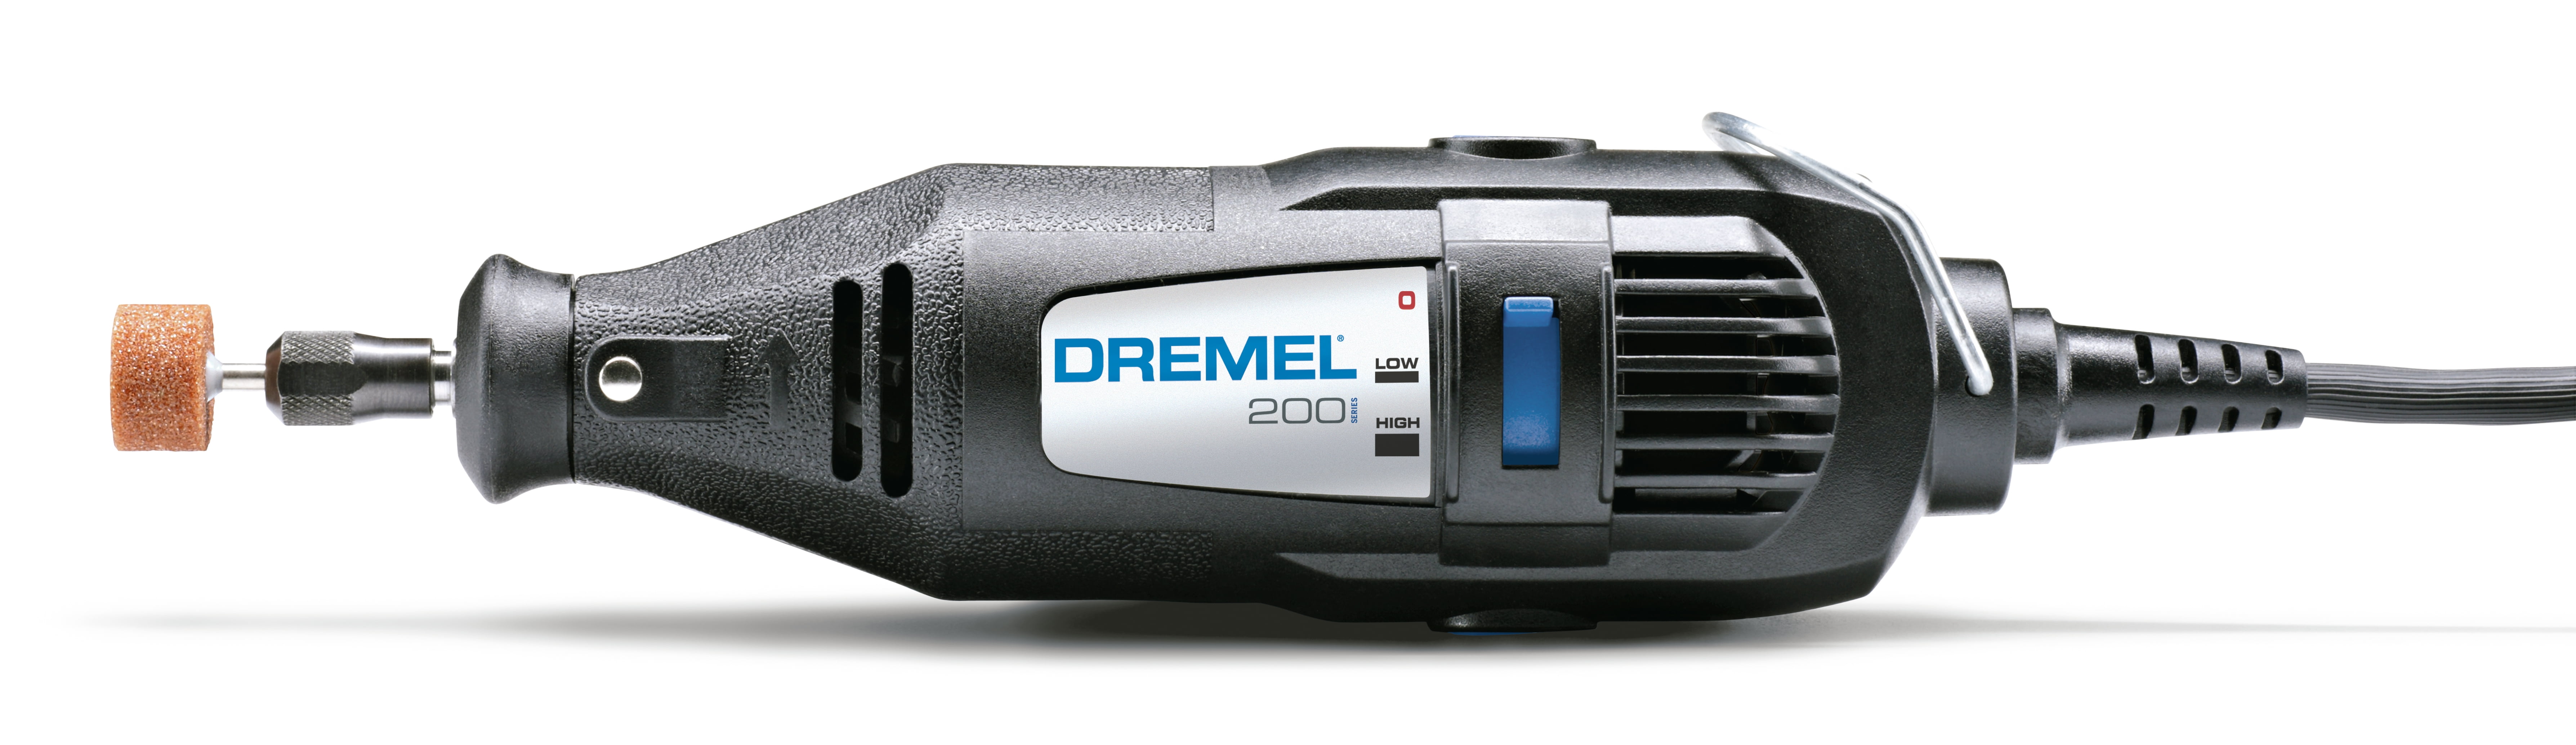 Dremel 200-1/15 Two Speed Rotary Tool Kit with 1 Attachment 15 Accessories  - Hobby Drill, Woodworking Carving Tool, Glass Etcher, Small Pen Sander,  Garden Tool Sharpener, Craft and Jewelry Drill 